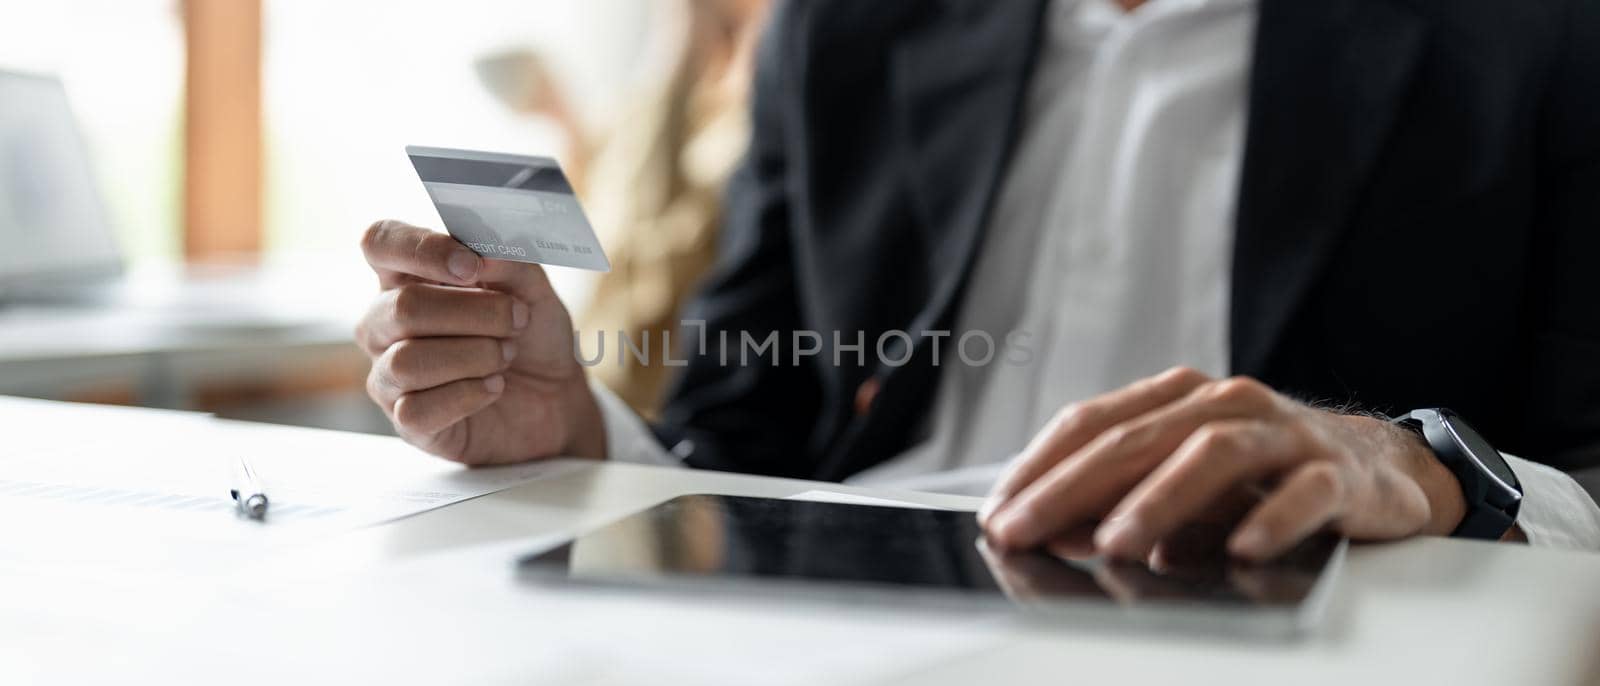 Man hands holding credit card and using laptop. Online shopping.